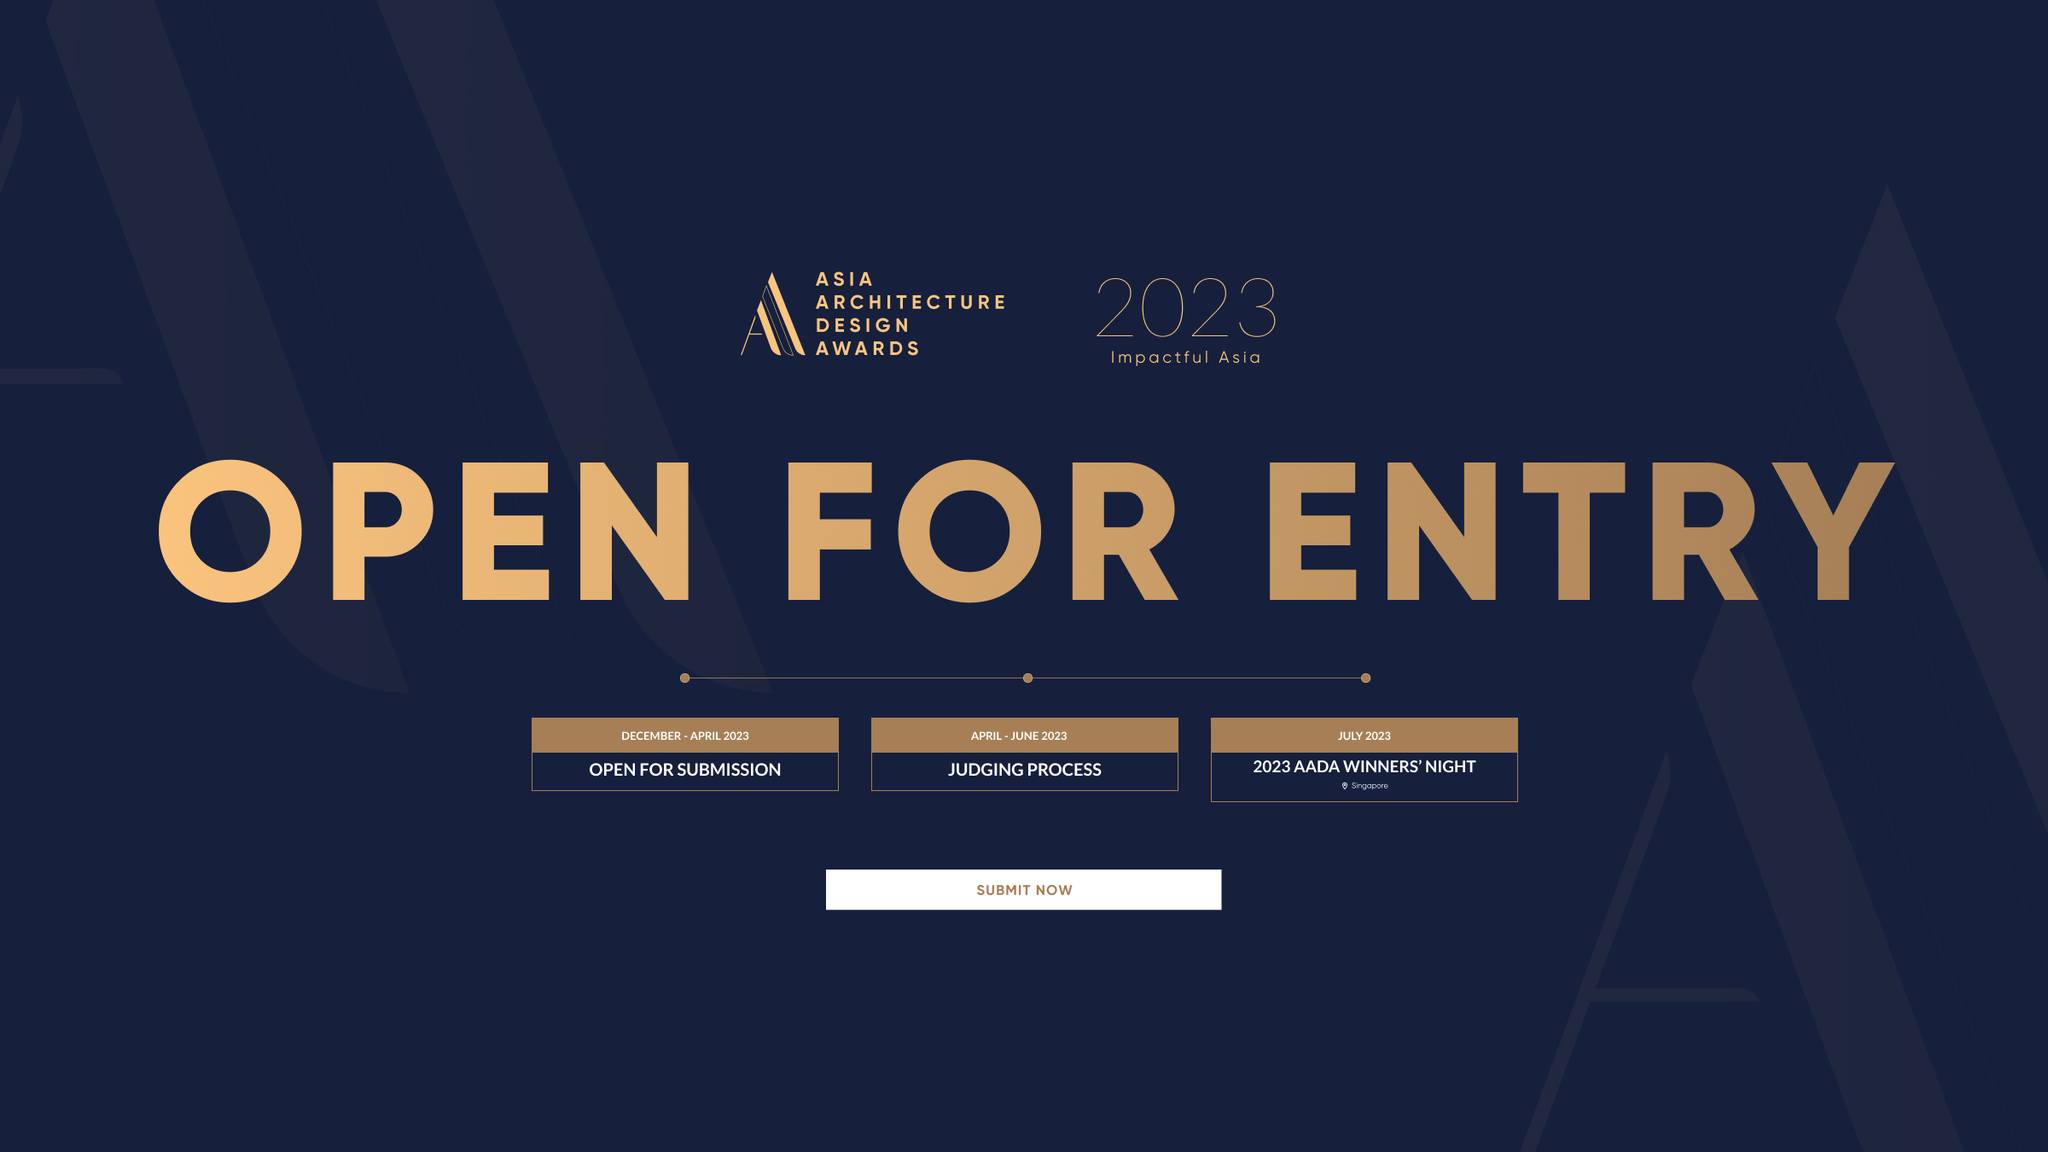 The 2023 Asia Architecture and Design Awards will take place from December 2022 to July 2023